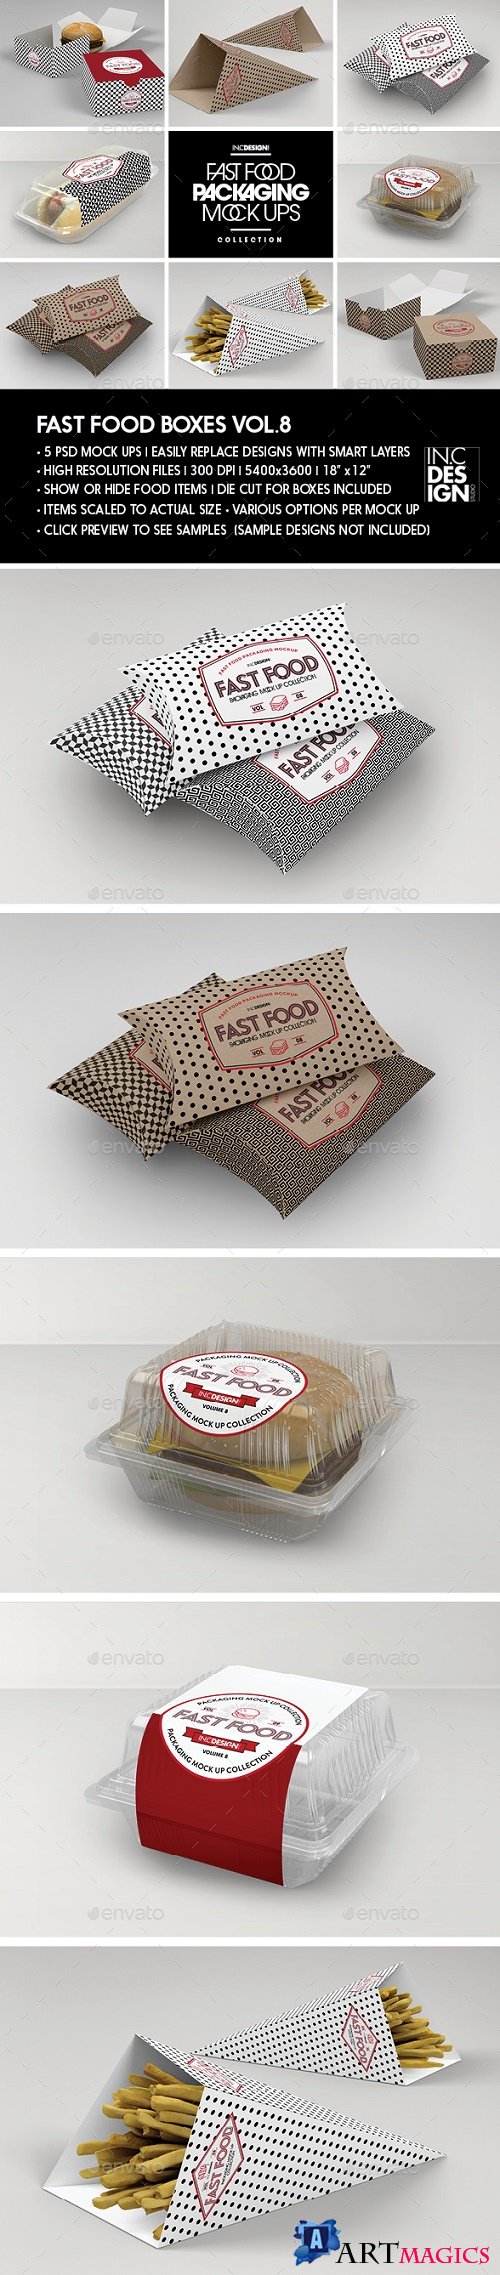 Fast Food Boxes Vol.8: Take Out Packaging Mock Ups - 19181969